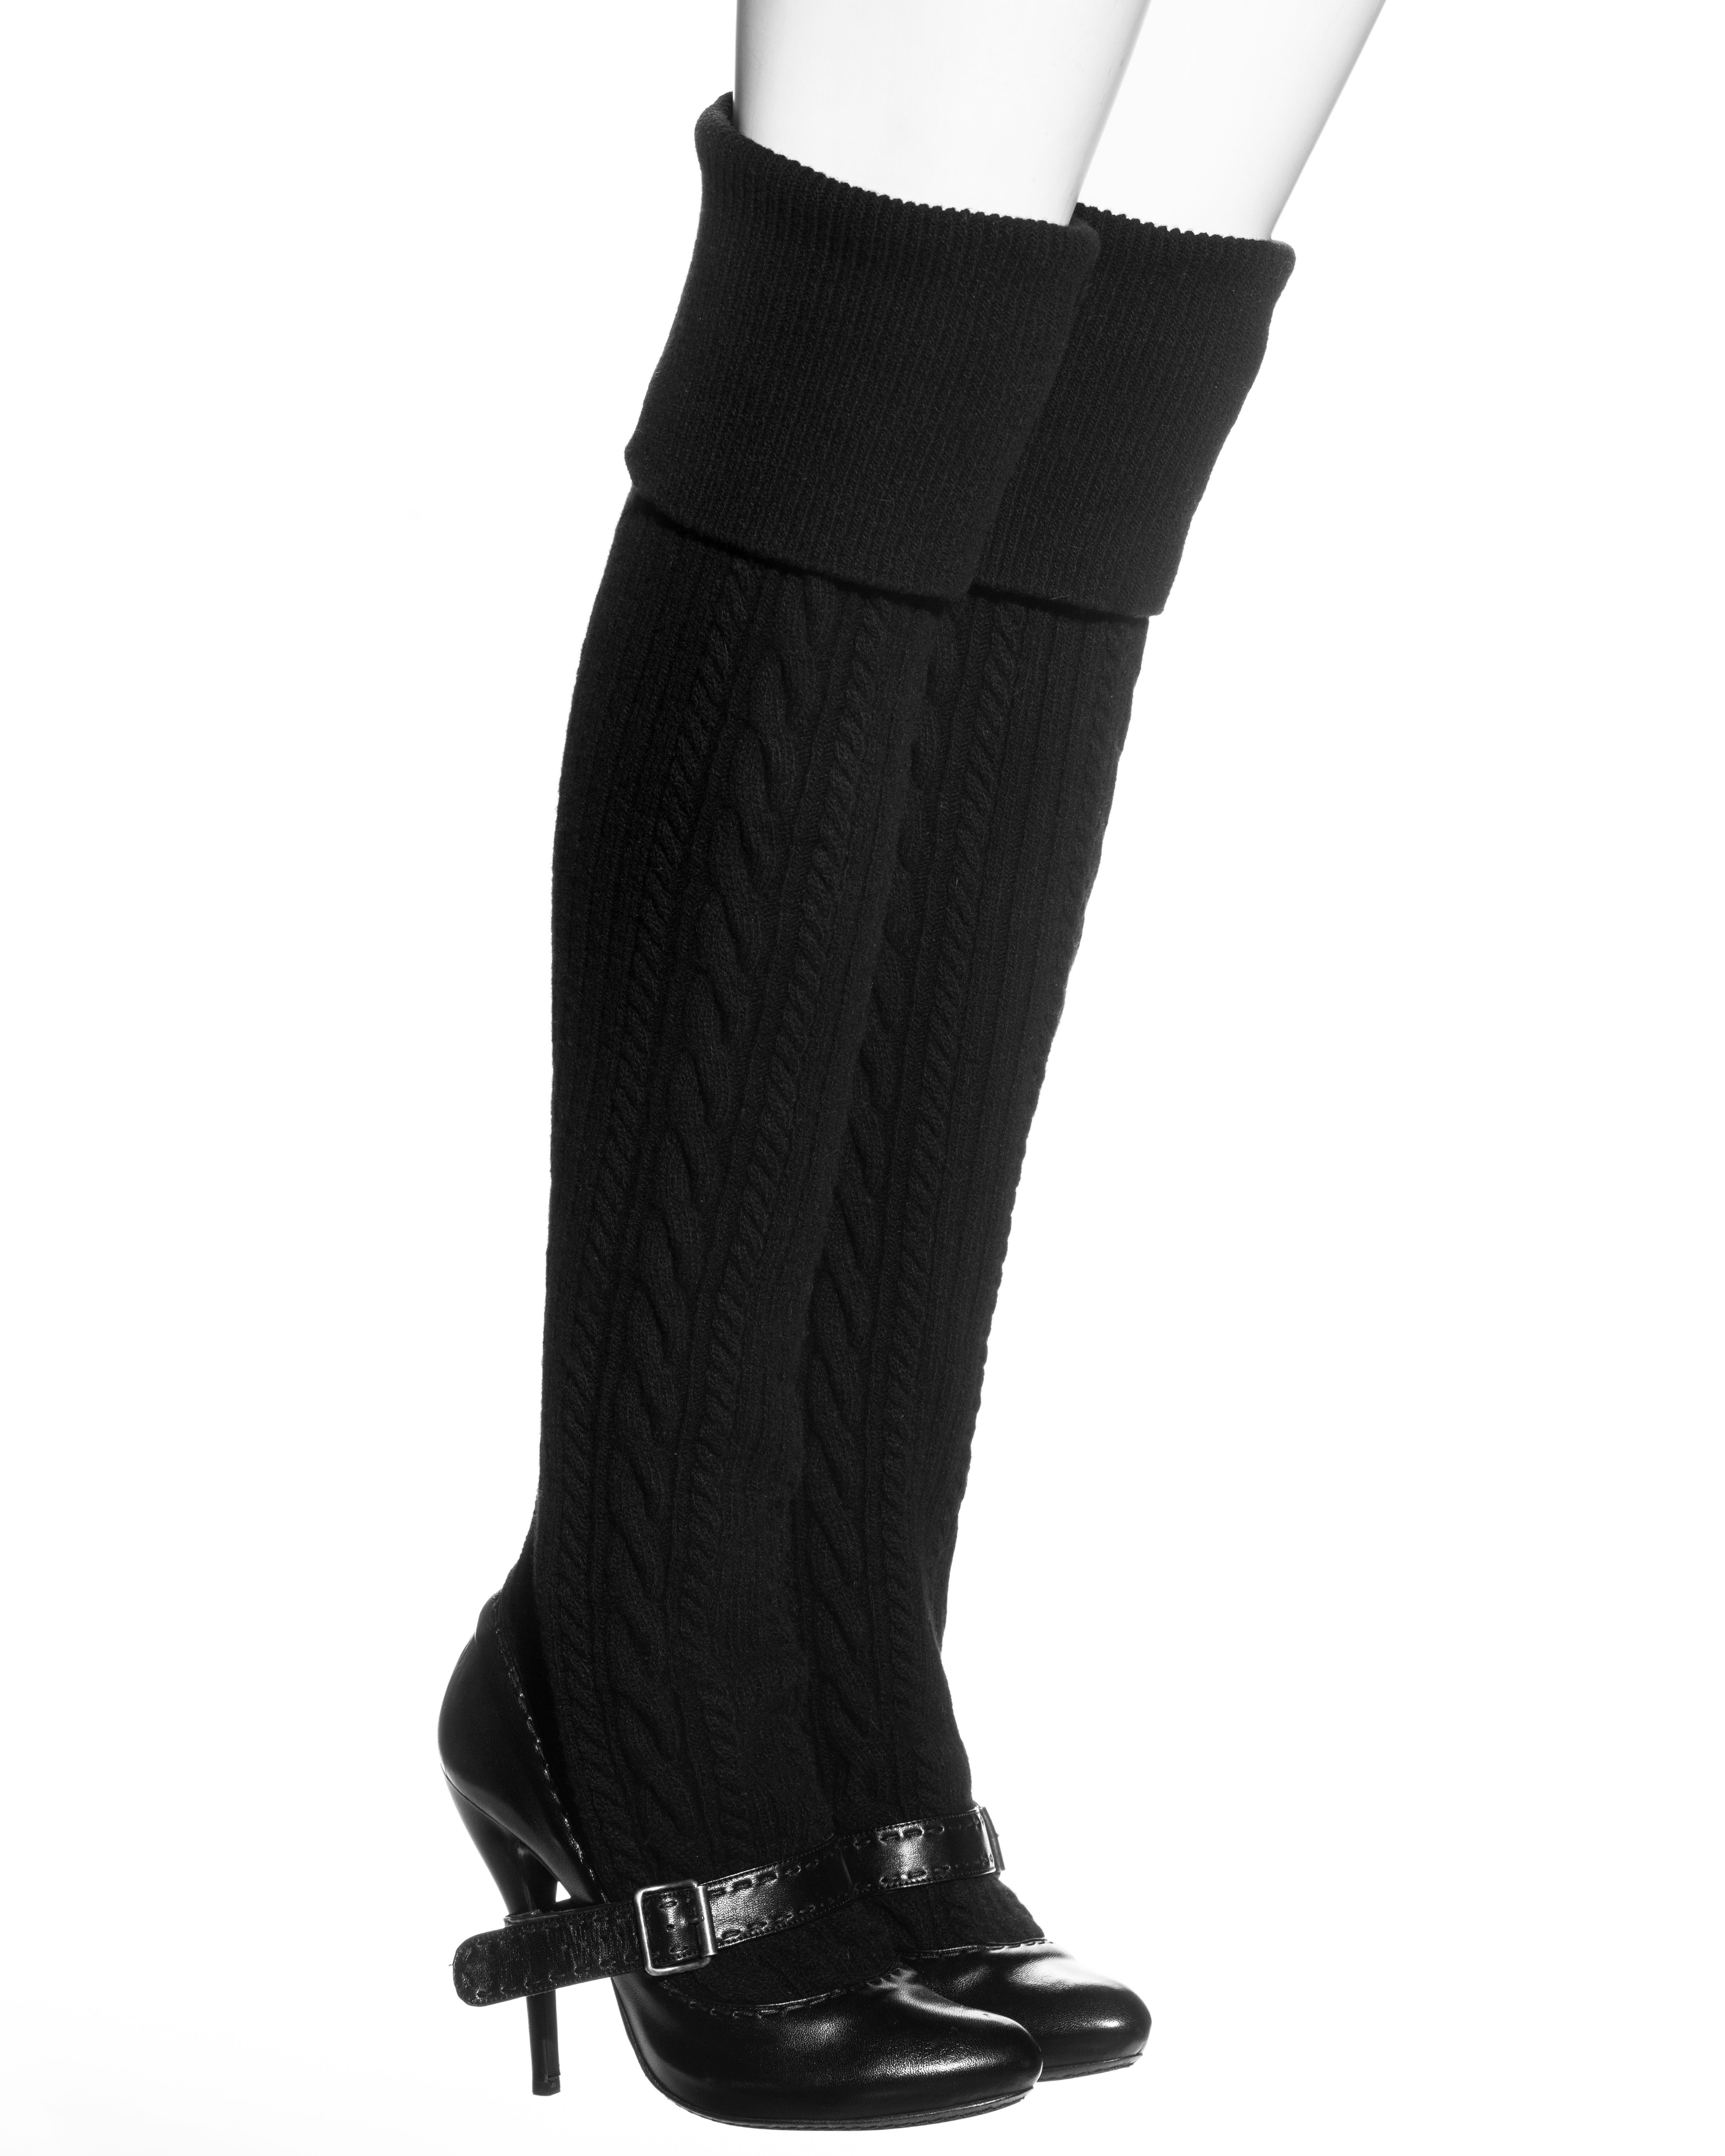 ▪ Alexander McQueen black thigh-high boots
▪ Black leather high-heel pumps 
▪ Attached knitted thigh-high socks 
▪ Black buckle strap around the heel and foot
▪ Size European 40 
▪ Fall-Winter 2006
▪ Made in Italy